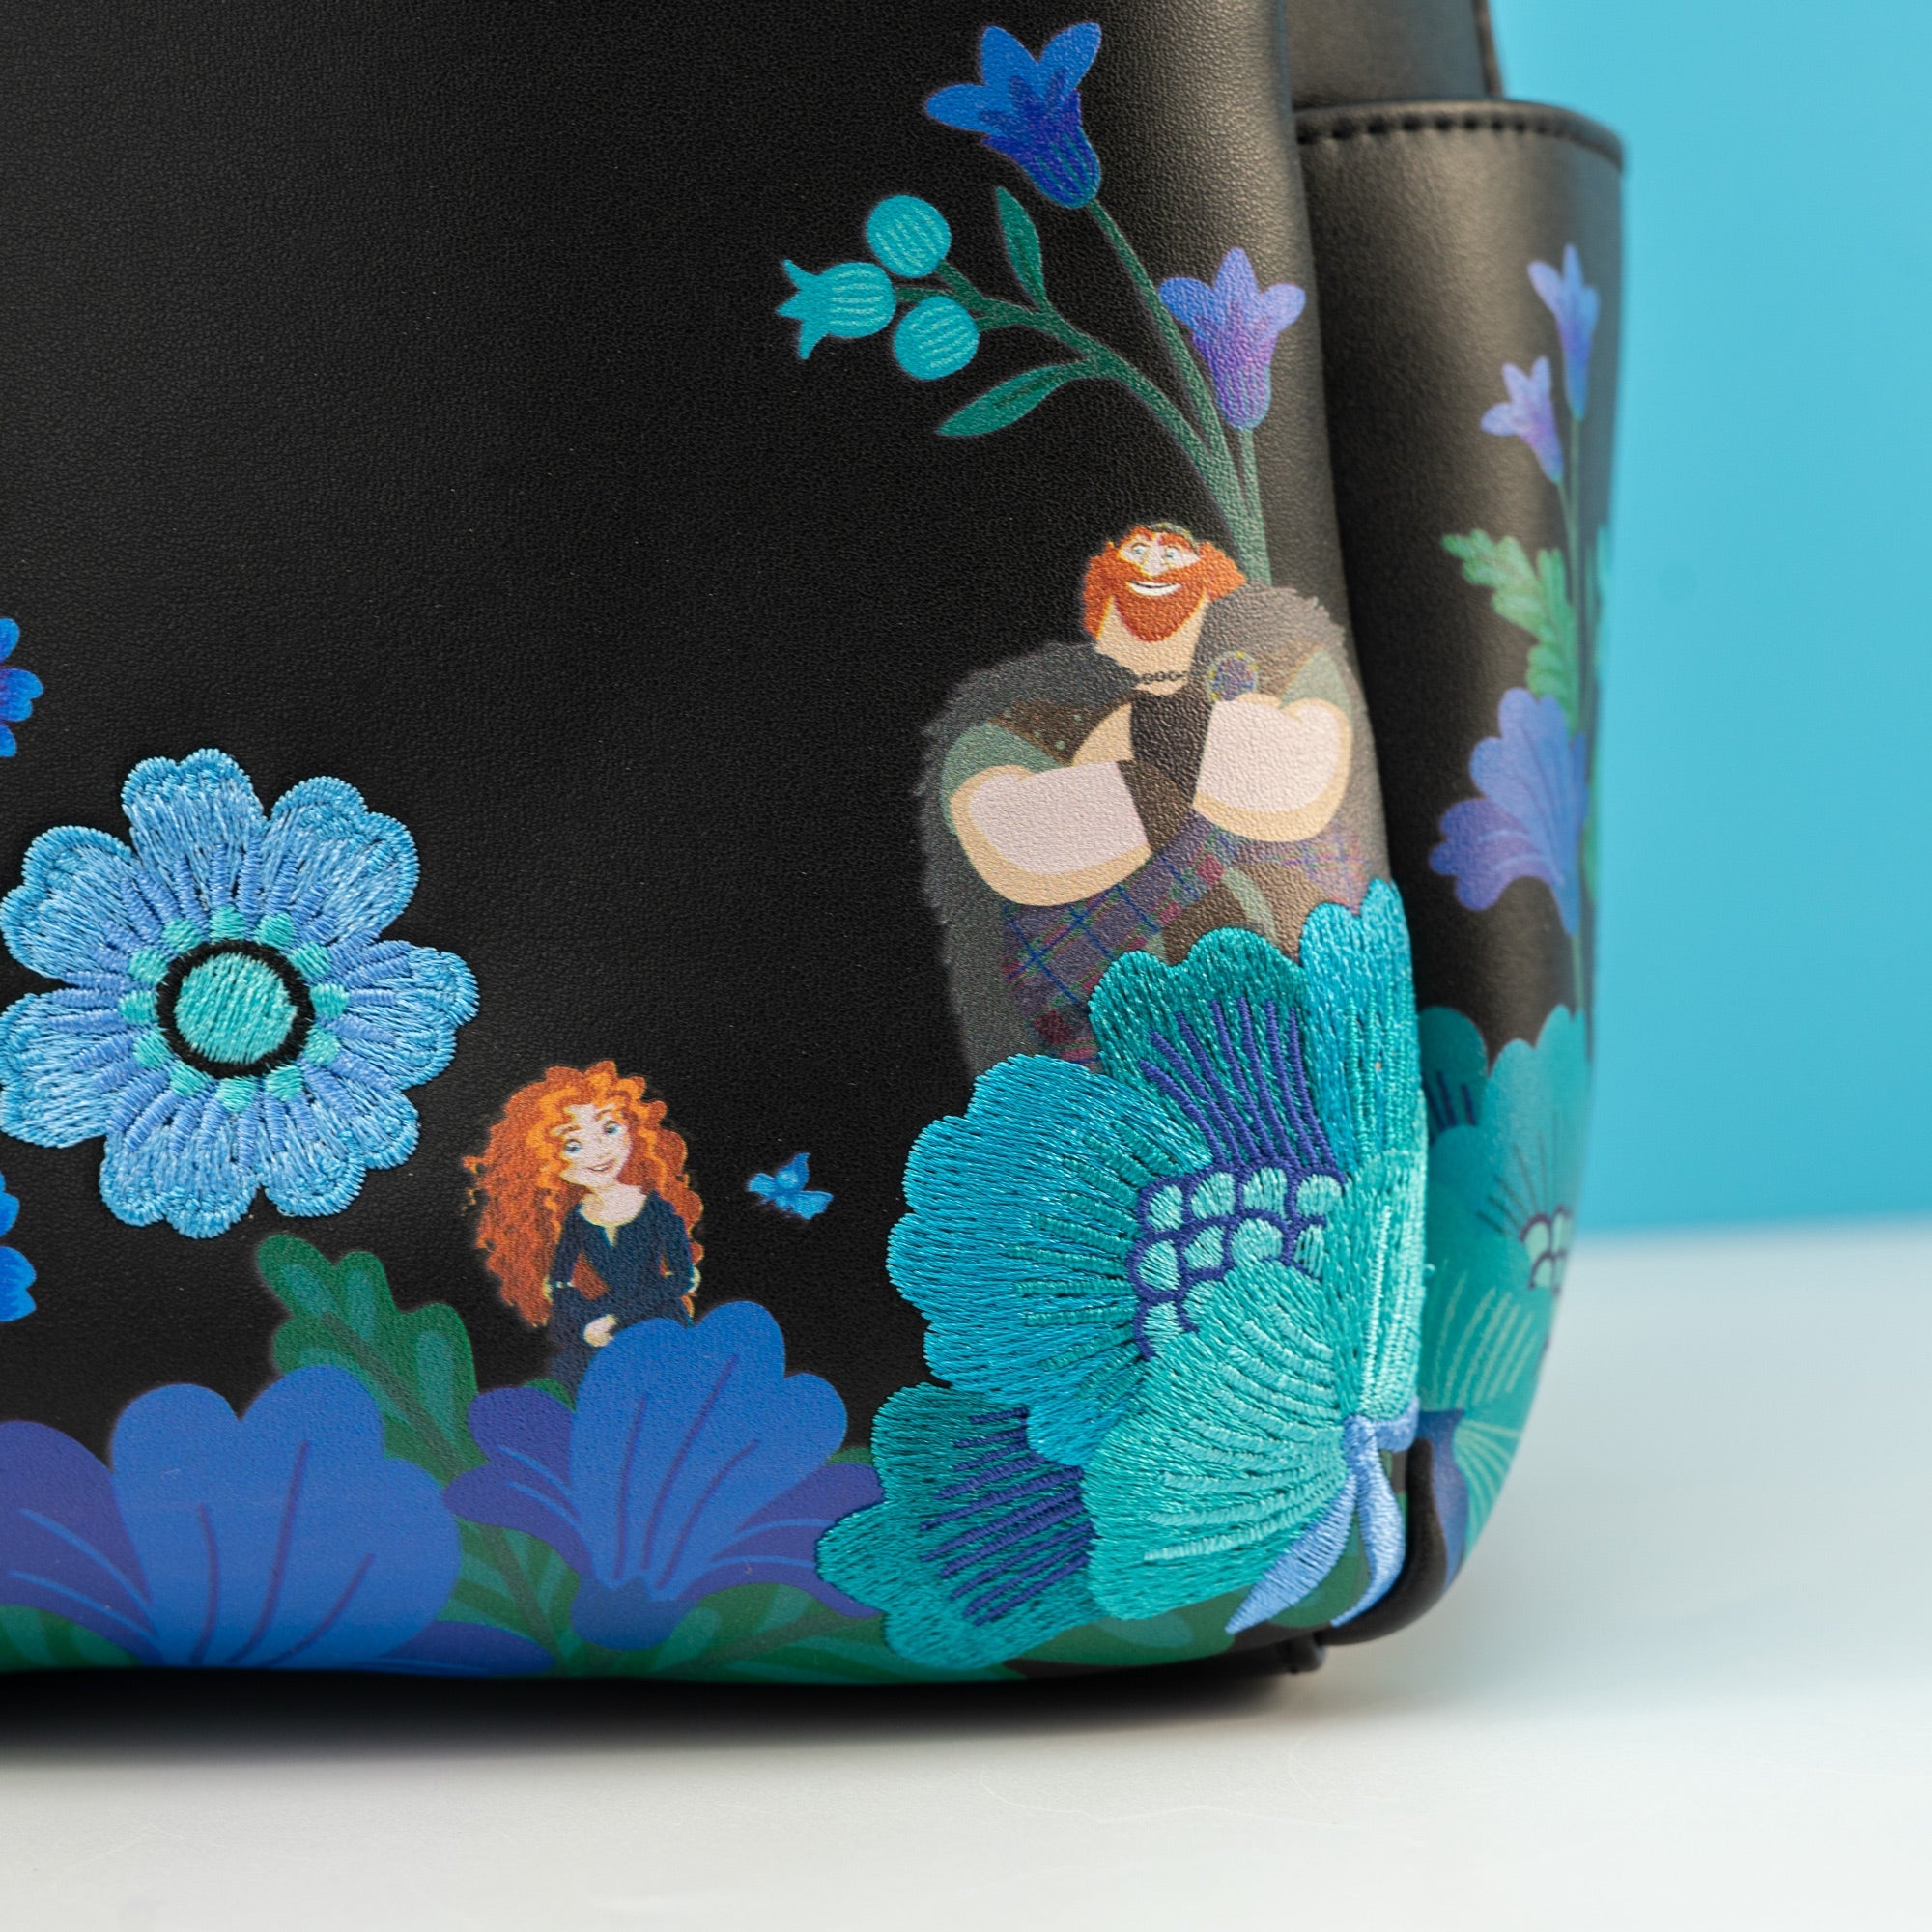 Loungefly x Disney Pixar Brave Floral Mini Backpack - GeekCore